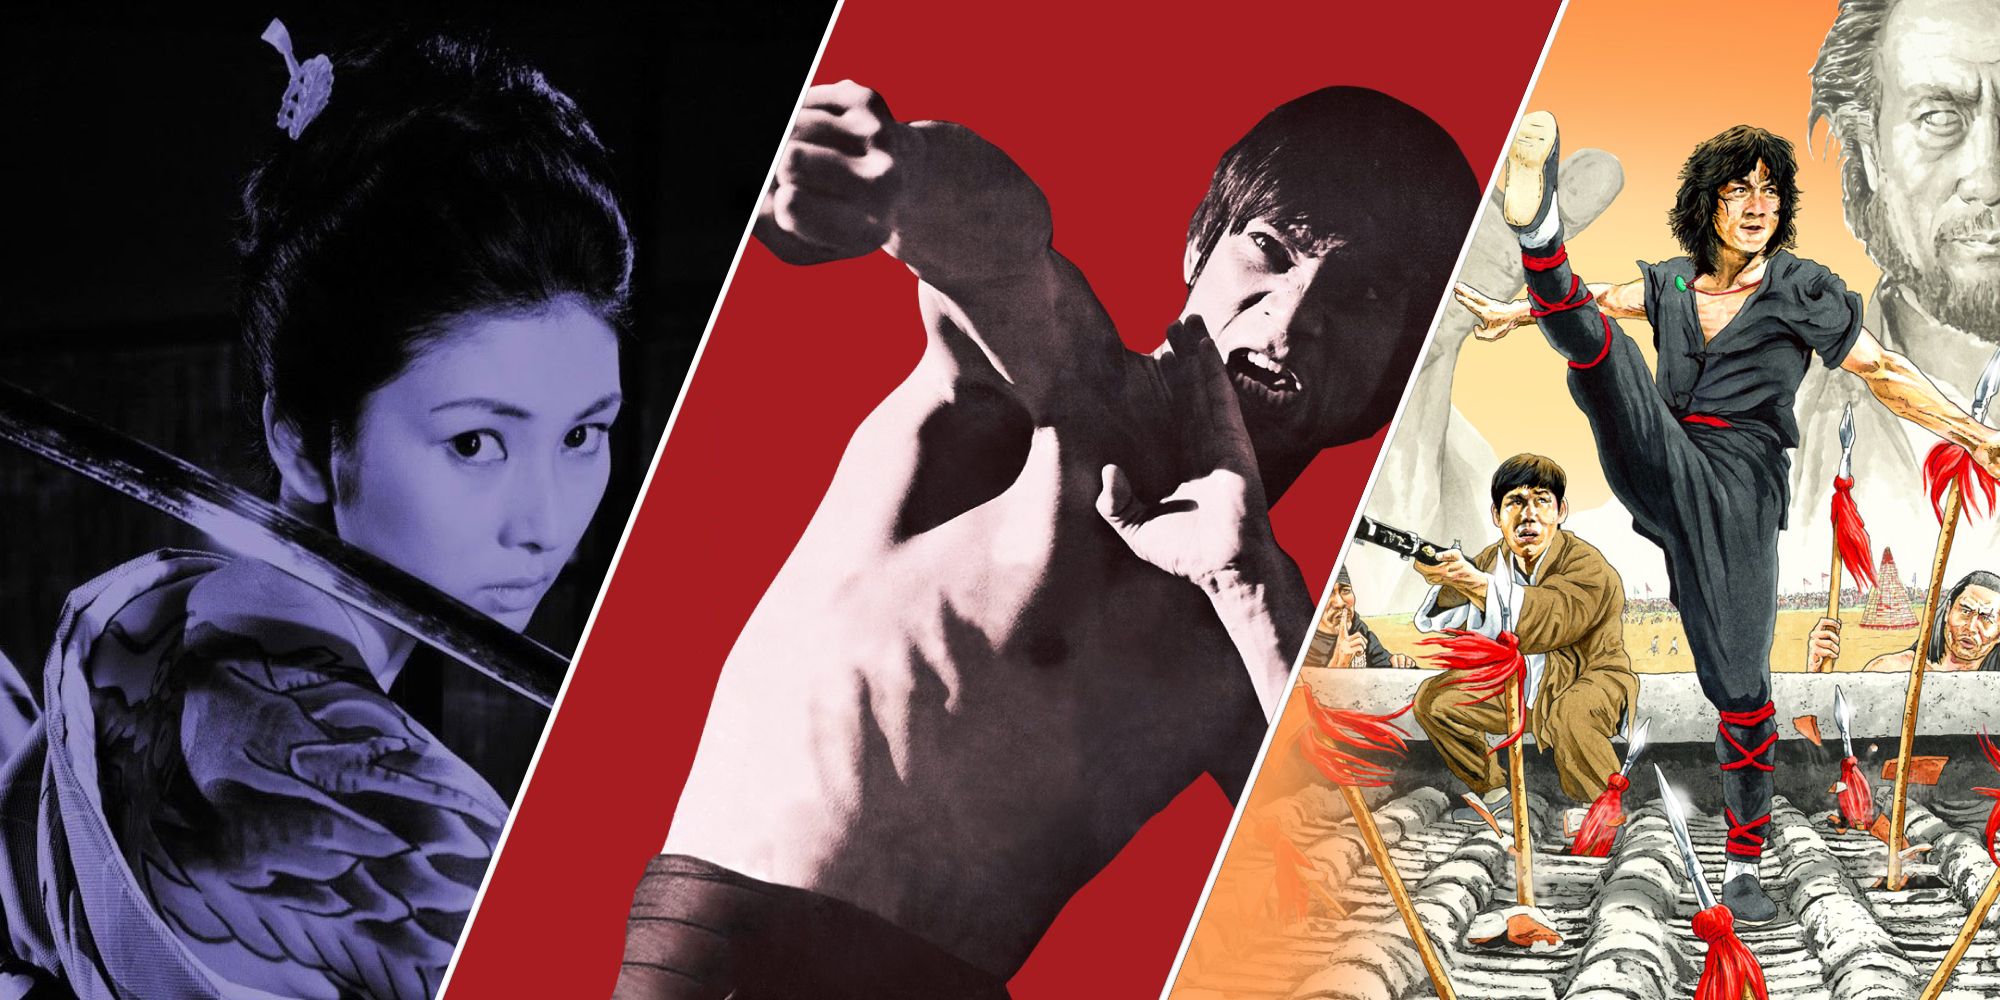 The 10 Most Underrated Classic Martial Arts Movies, According to Letterboxd